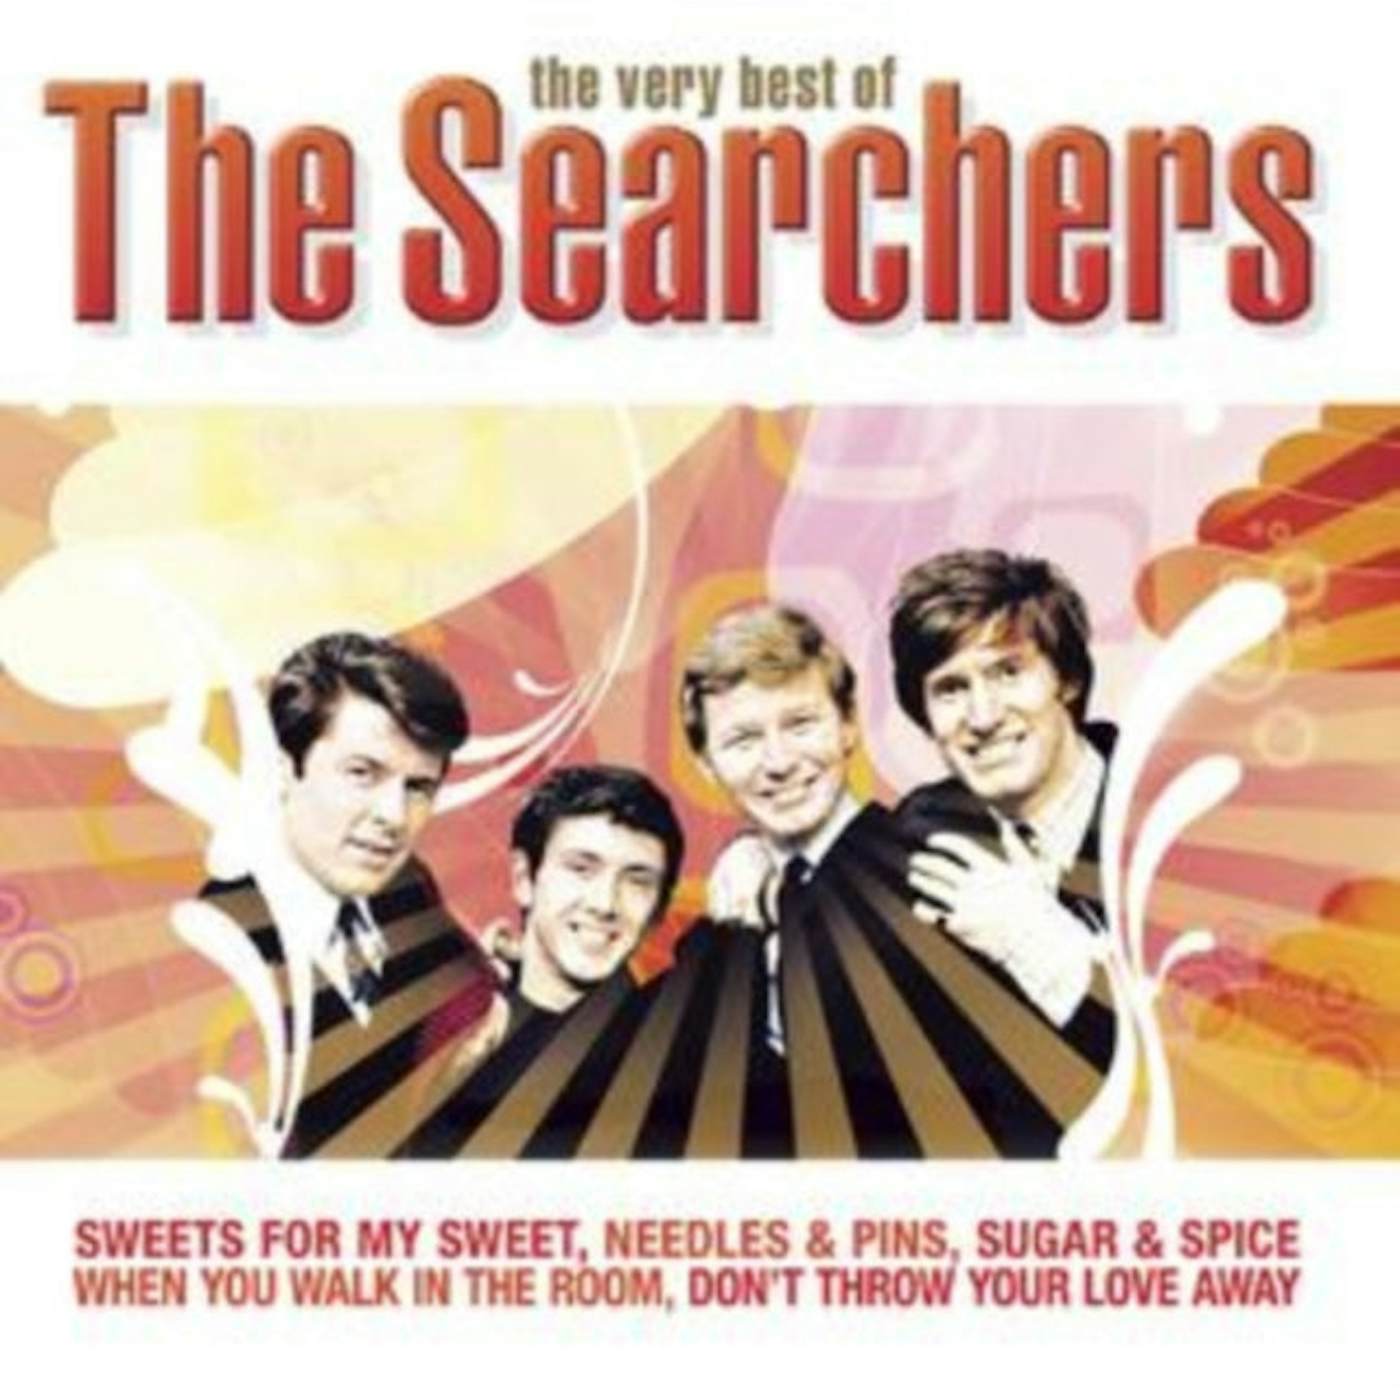 The Searchers CD - The Very Best Of